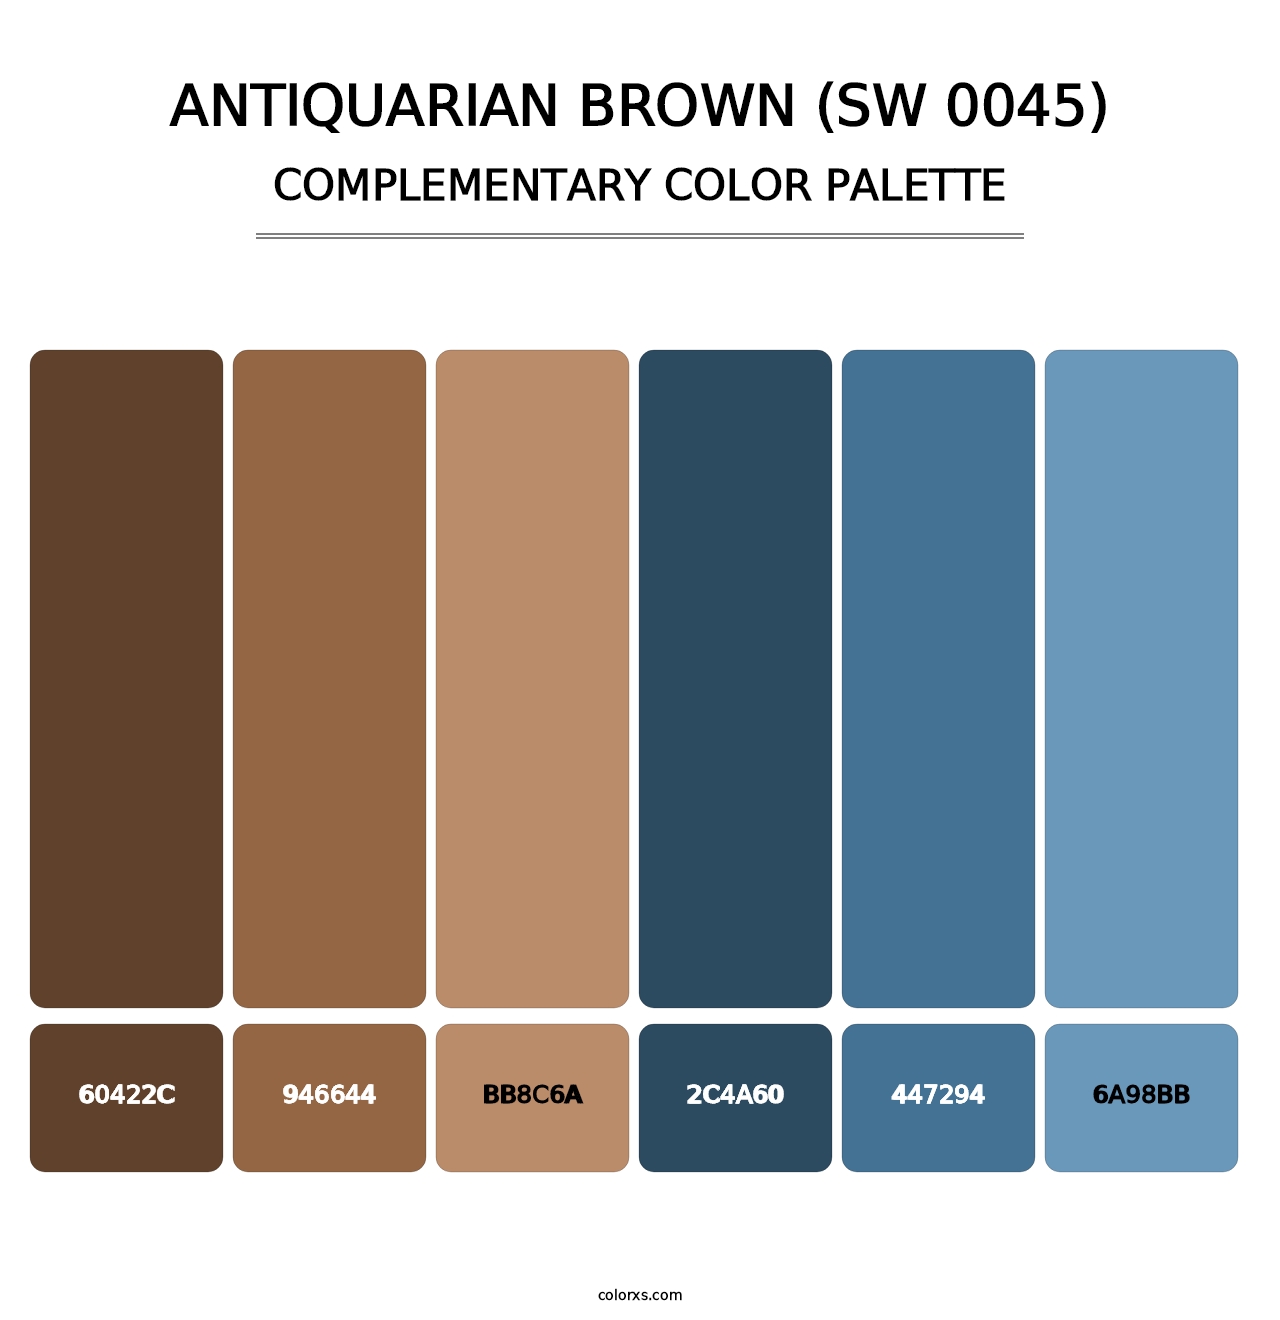 Antiquarian Brown (SW 0045) - Complementary Color Palette